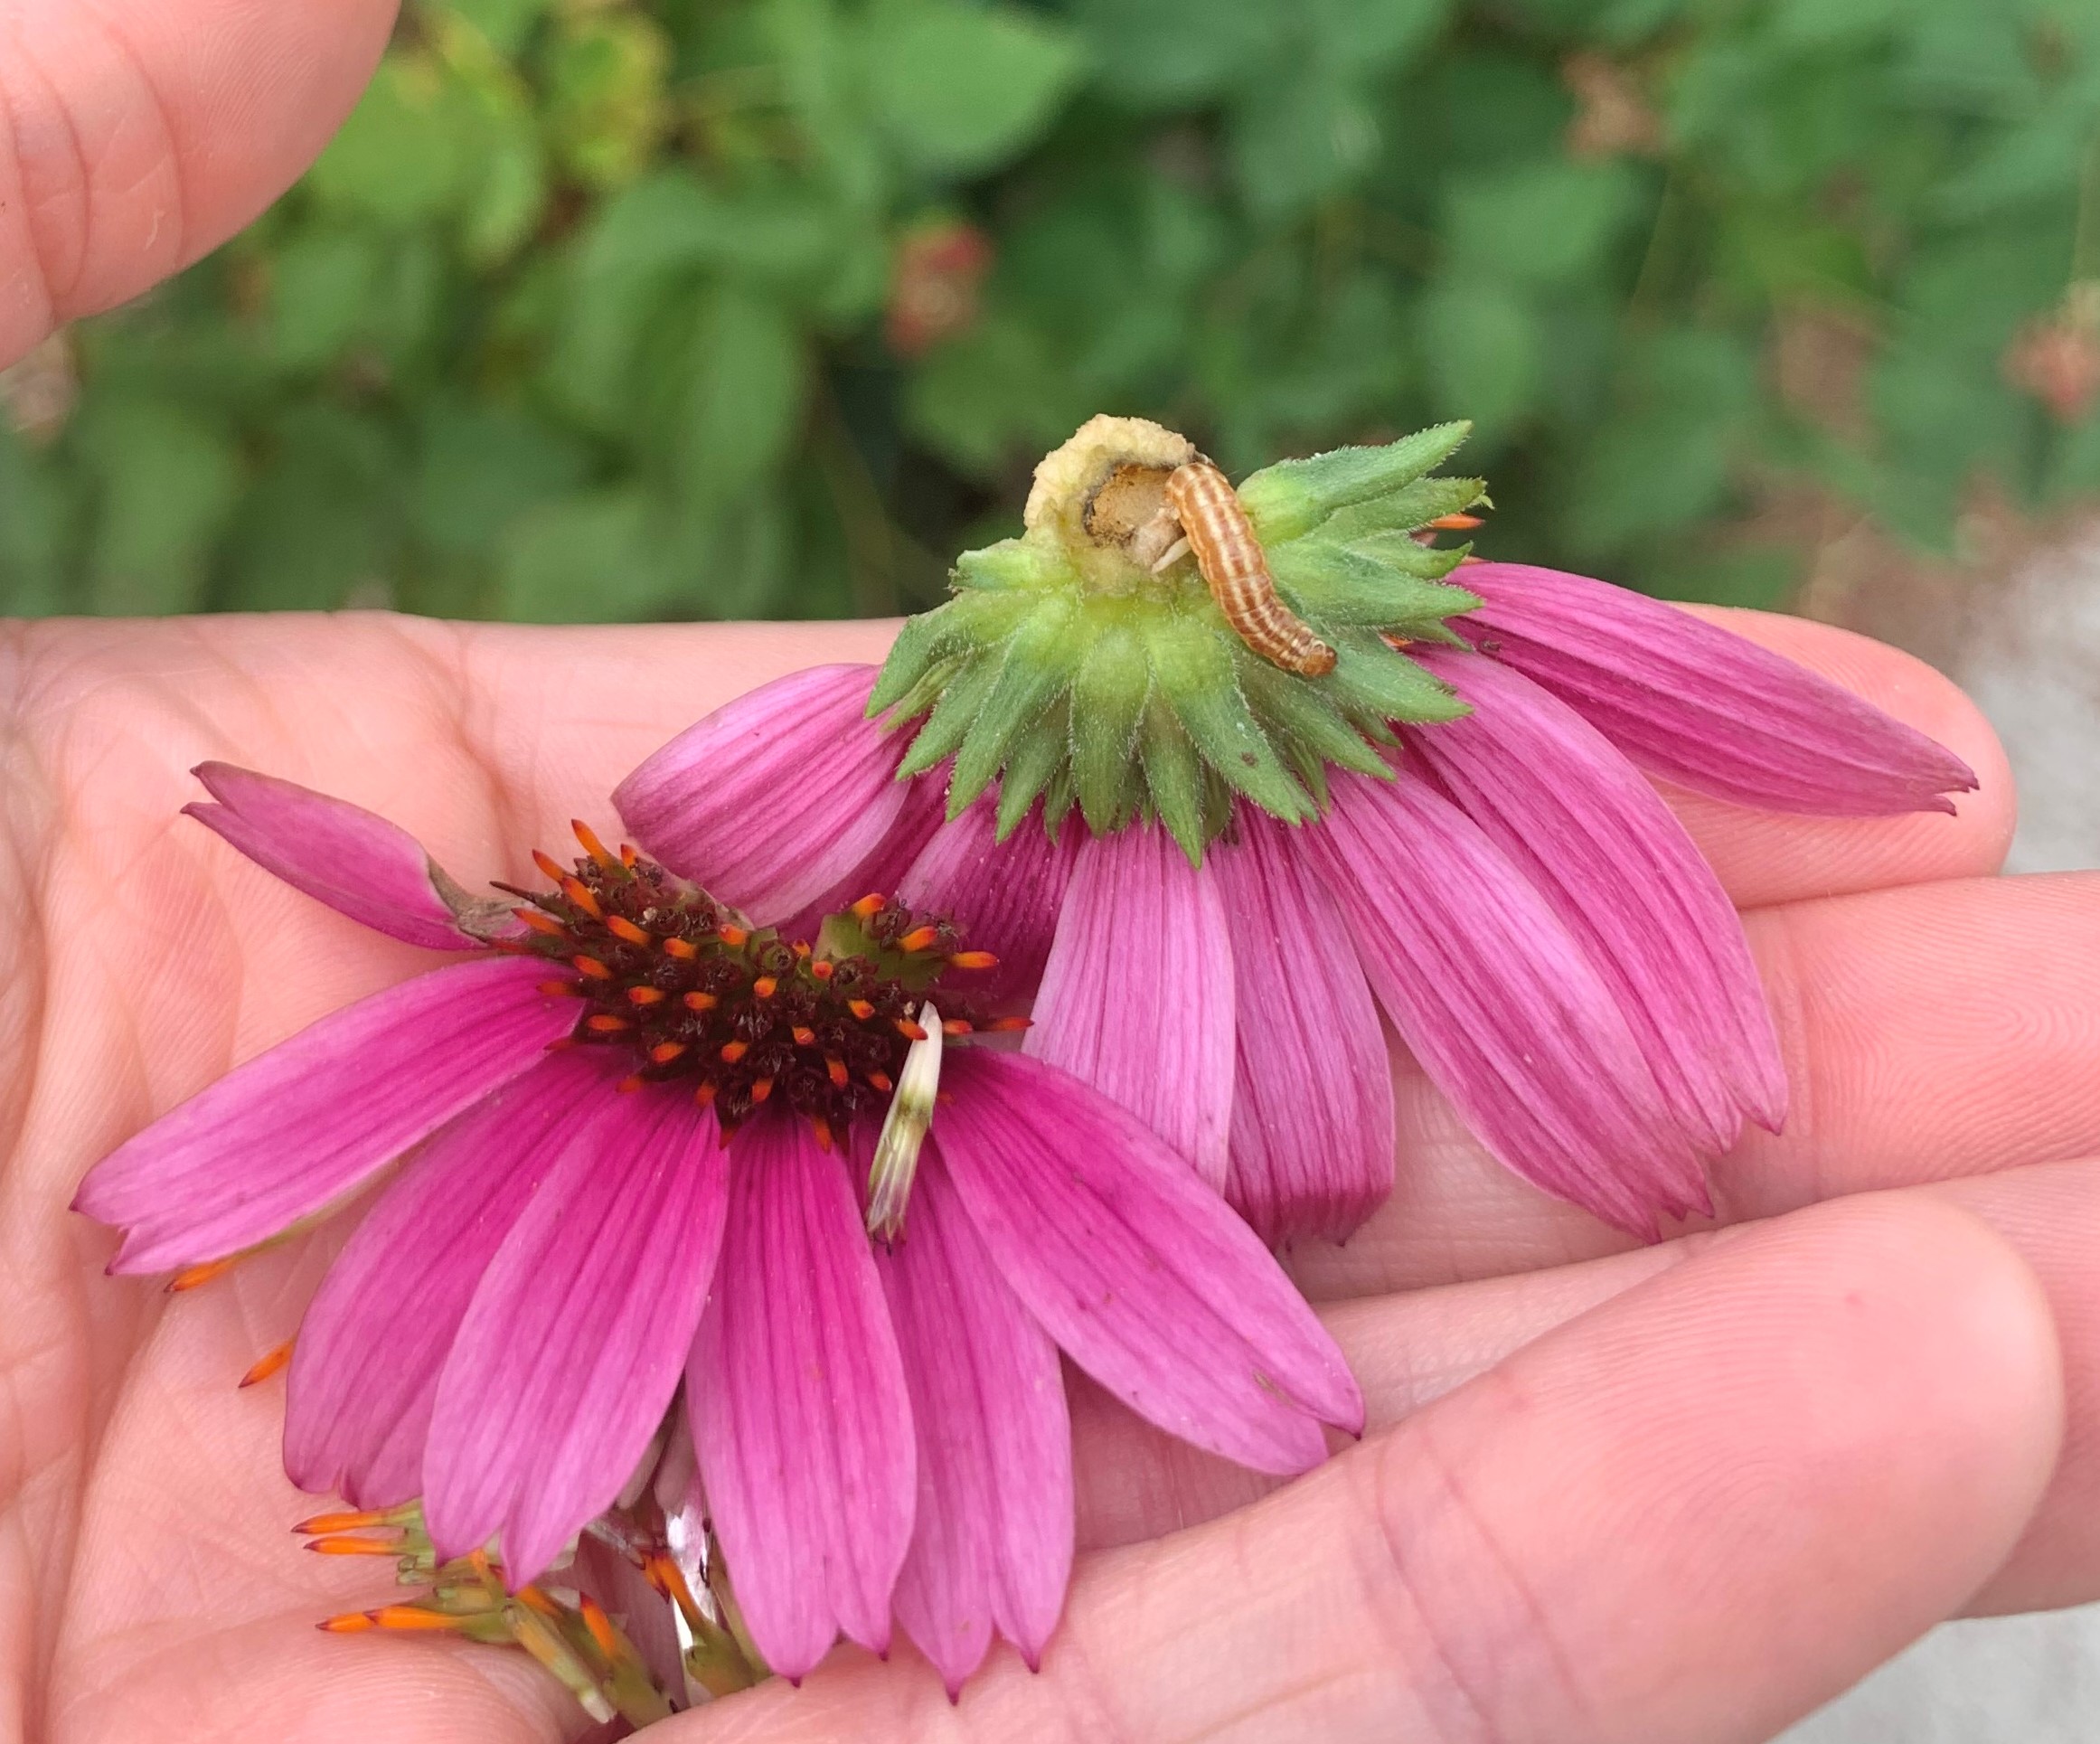 This flower head of purple coneflower has been pulled apart to reveal a brown-and-white striped caterpillar than was feeding inside.